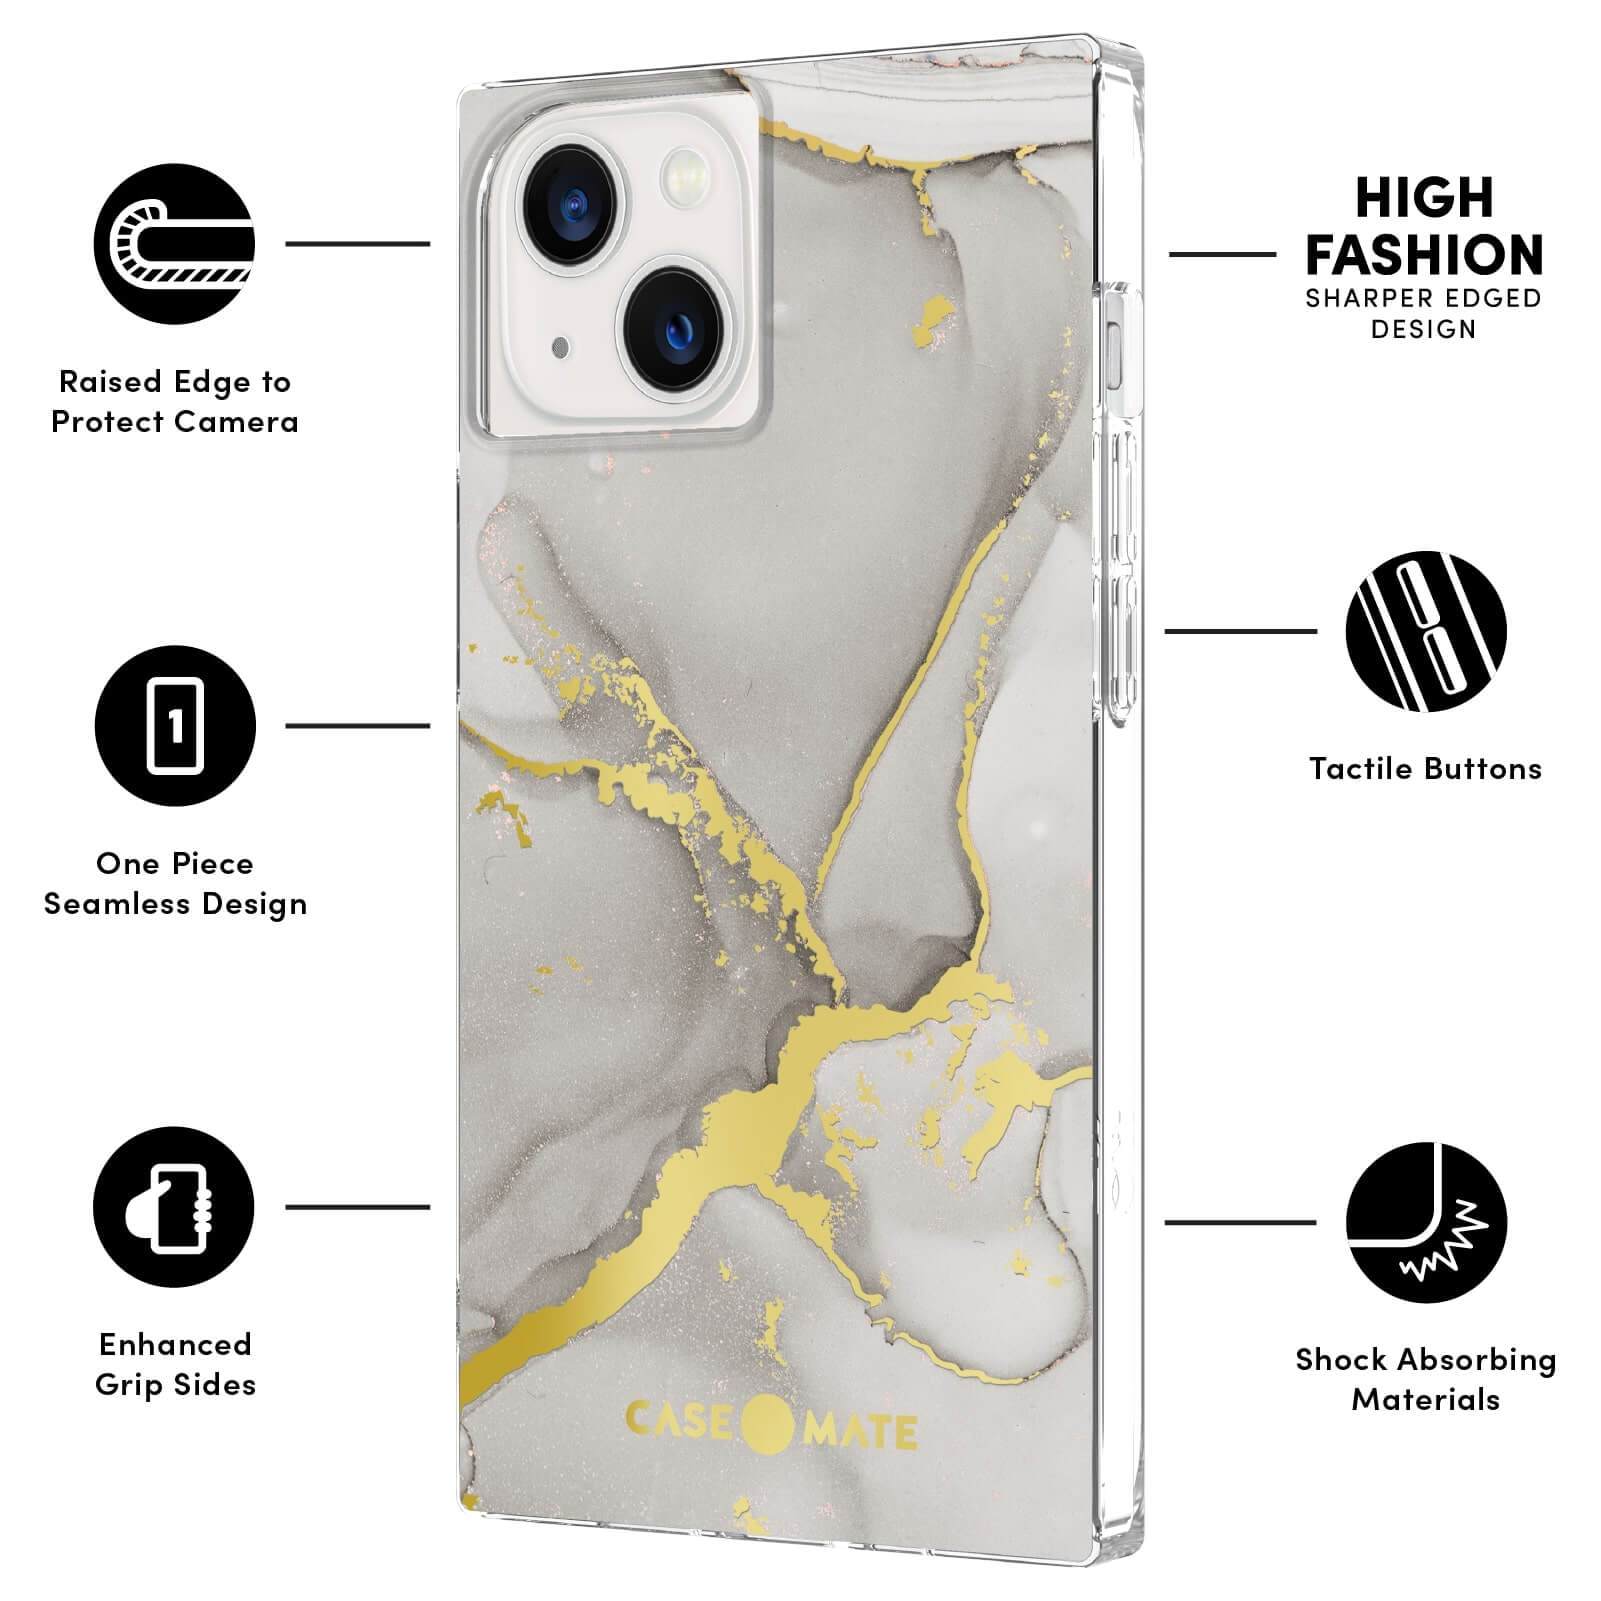 FEATURES: RAISED EDGE TO PROTECT CAMERA, ONE PIECE SEAMLESS DESIGN, ENHANCED GRIP SIDES, HIGH FASHION SHARPER DESIGN, TACTILE BUTTONS, SHOCK ABSORBING MATERIALS. COLOR::FOG MARBLE